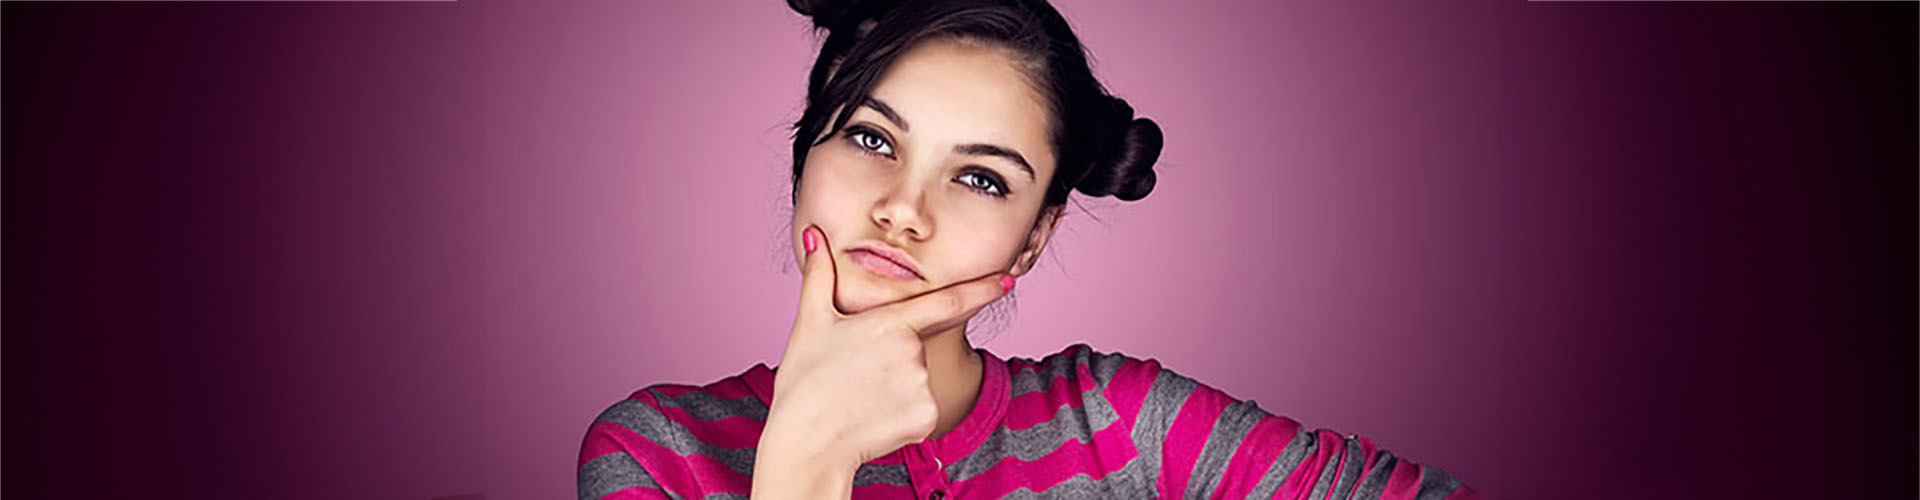 thinking girl on pink background